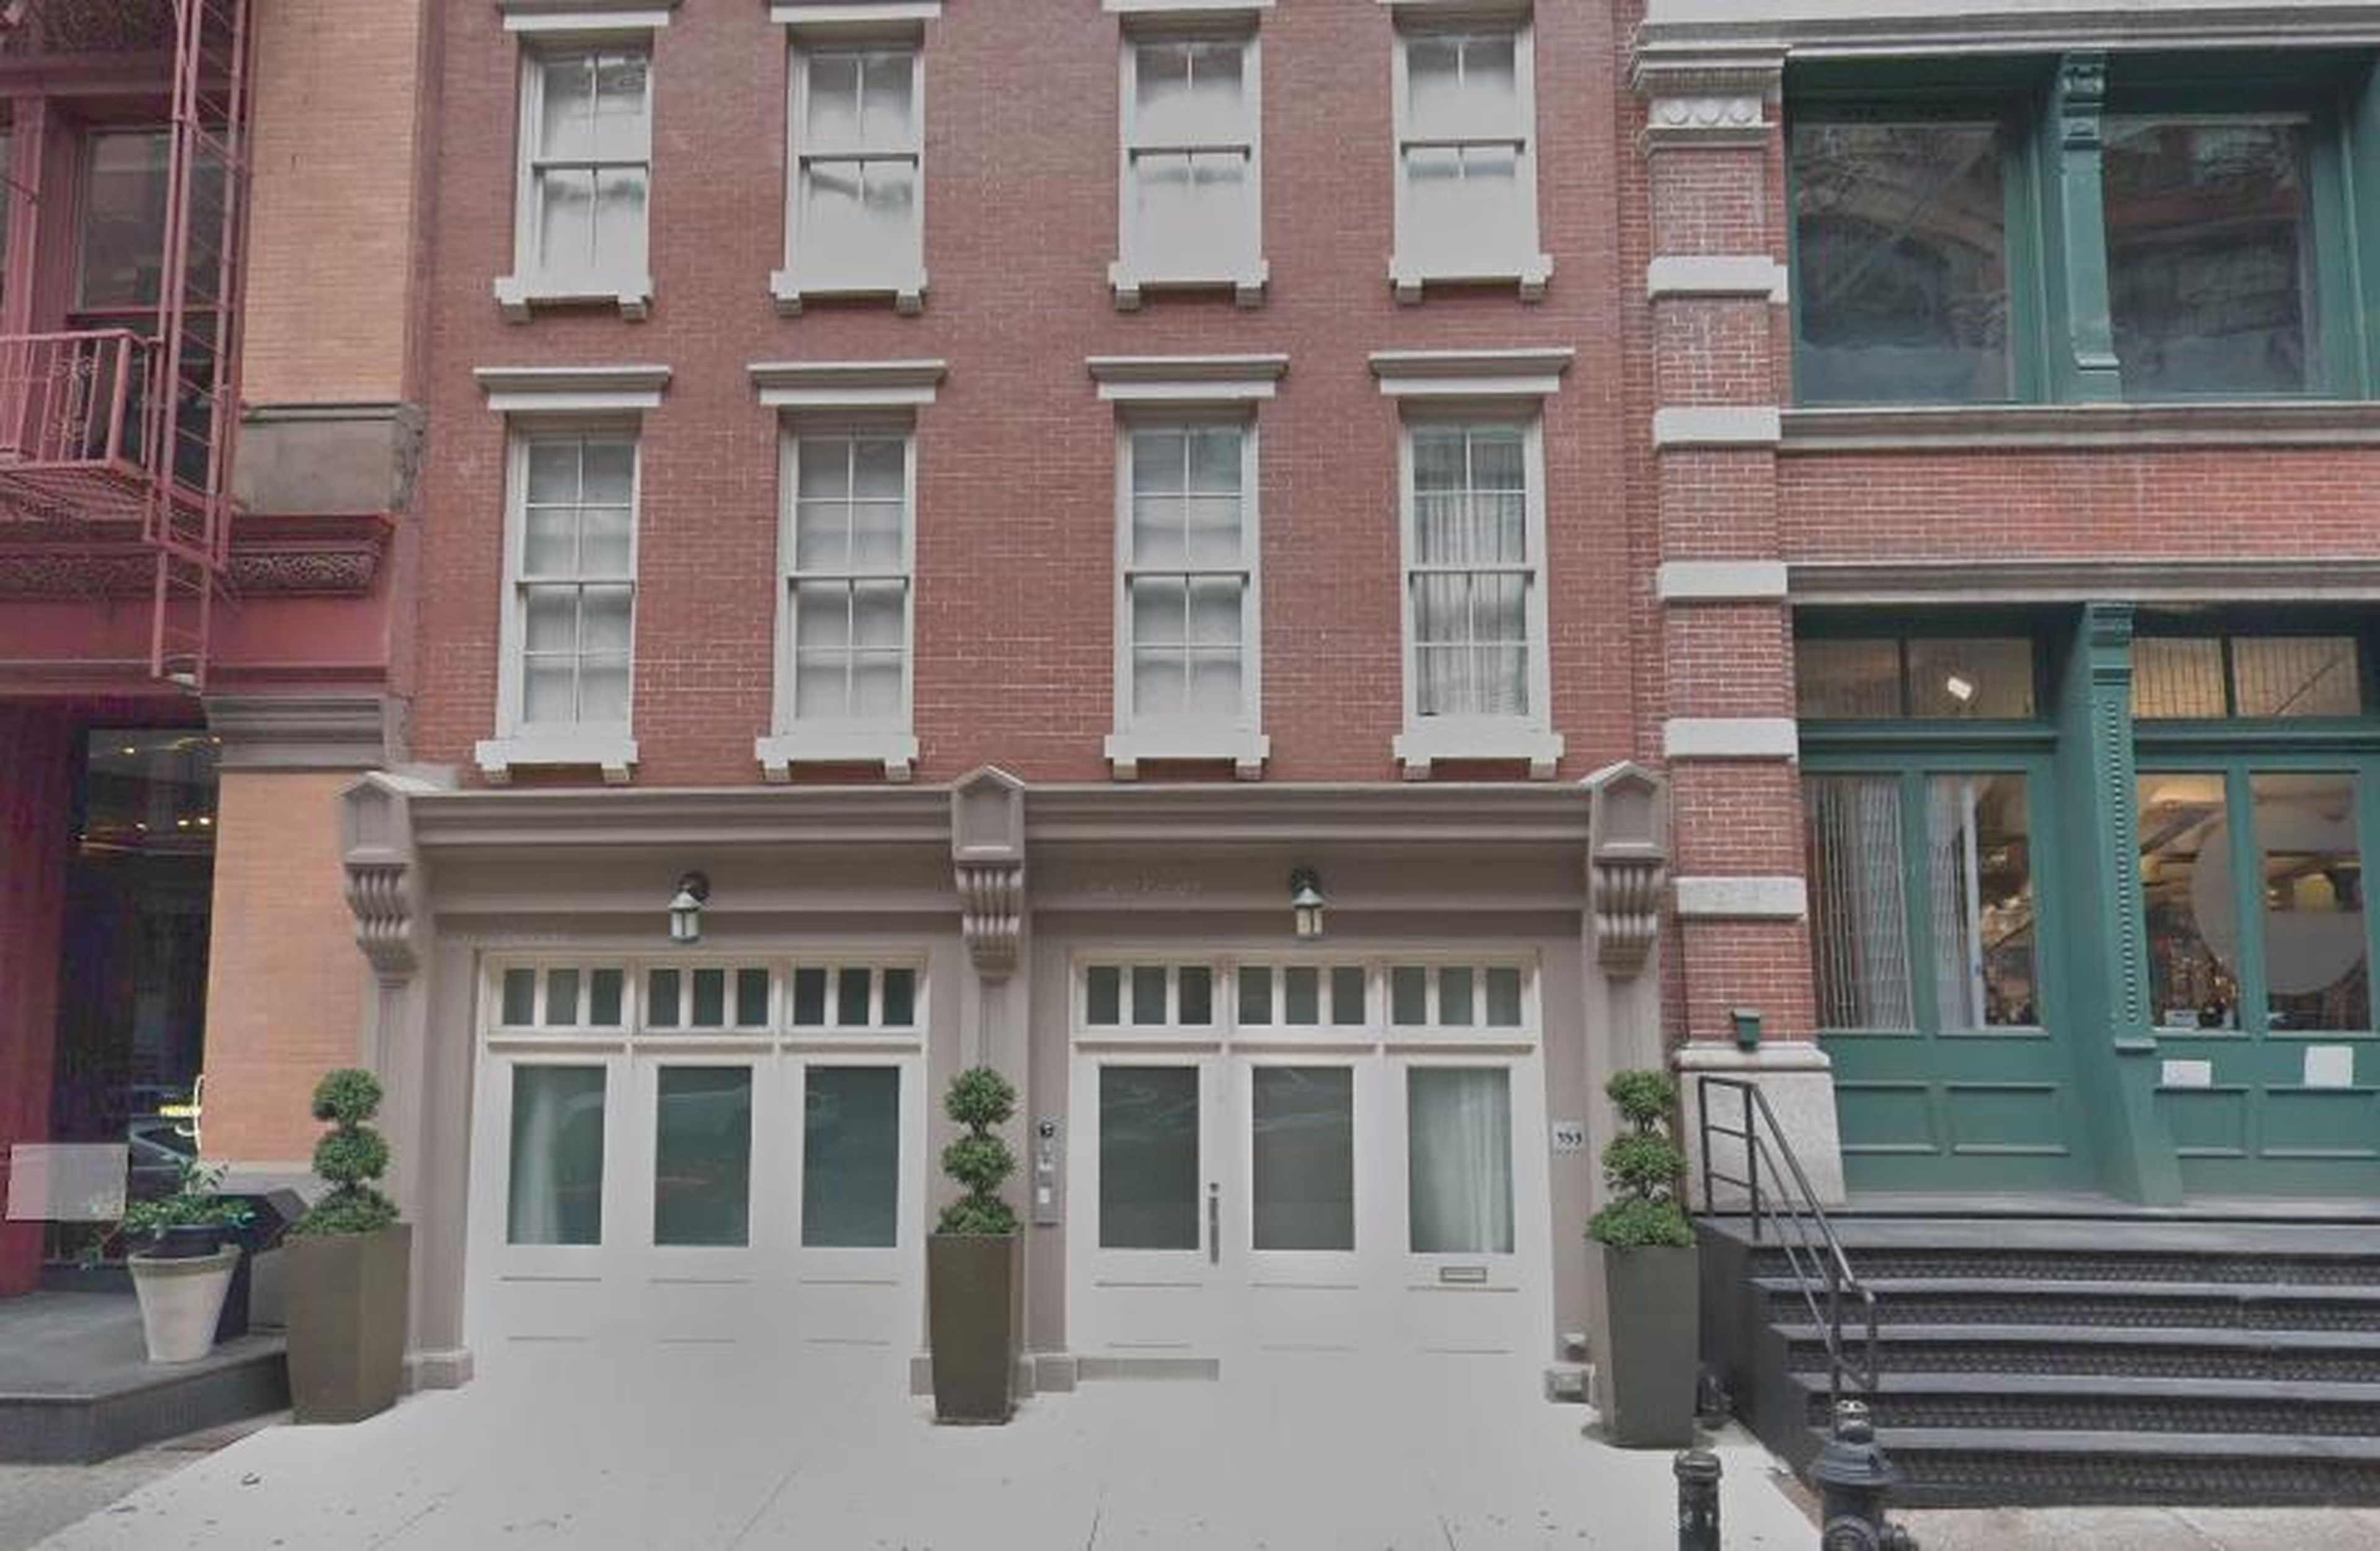 Taylor Swift's Tribeca townhouse.